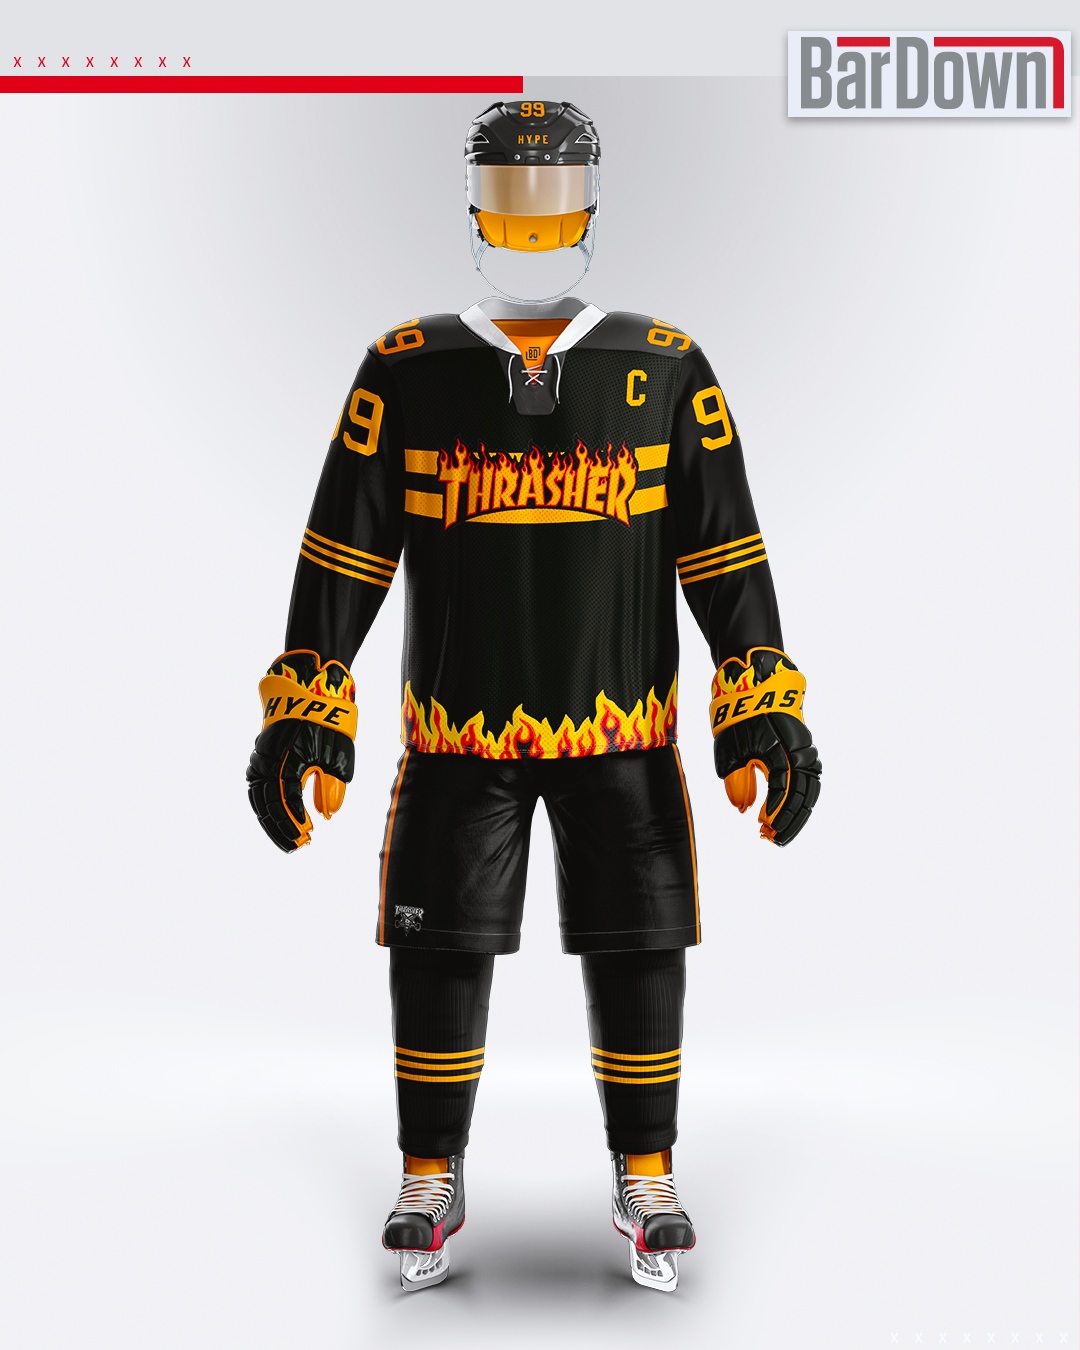 This Islanders' Fisherman concept jersey should be New York's third jersey  - Article - Bardown